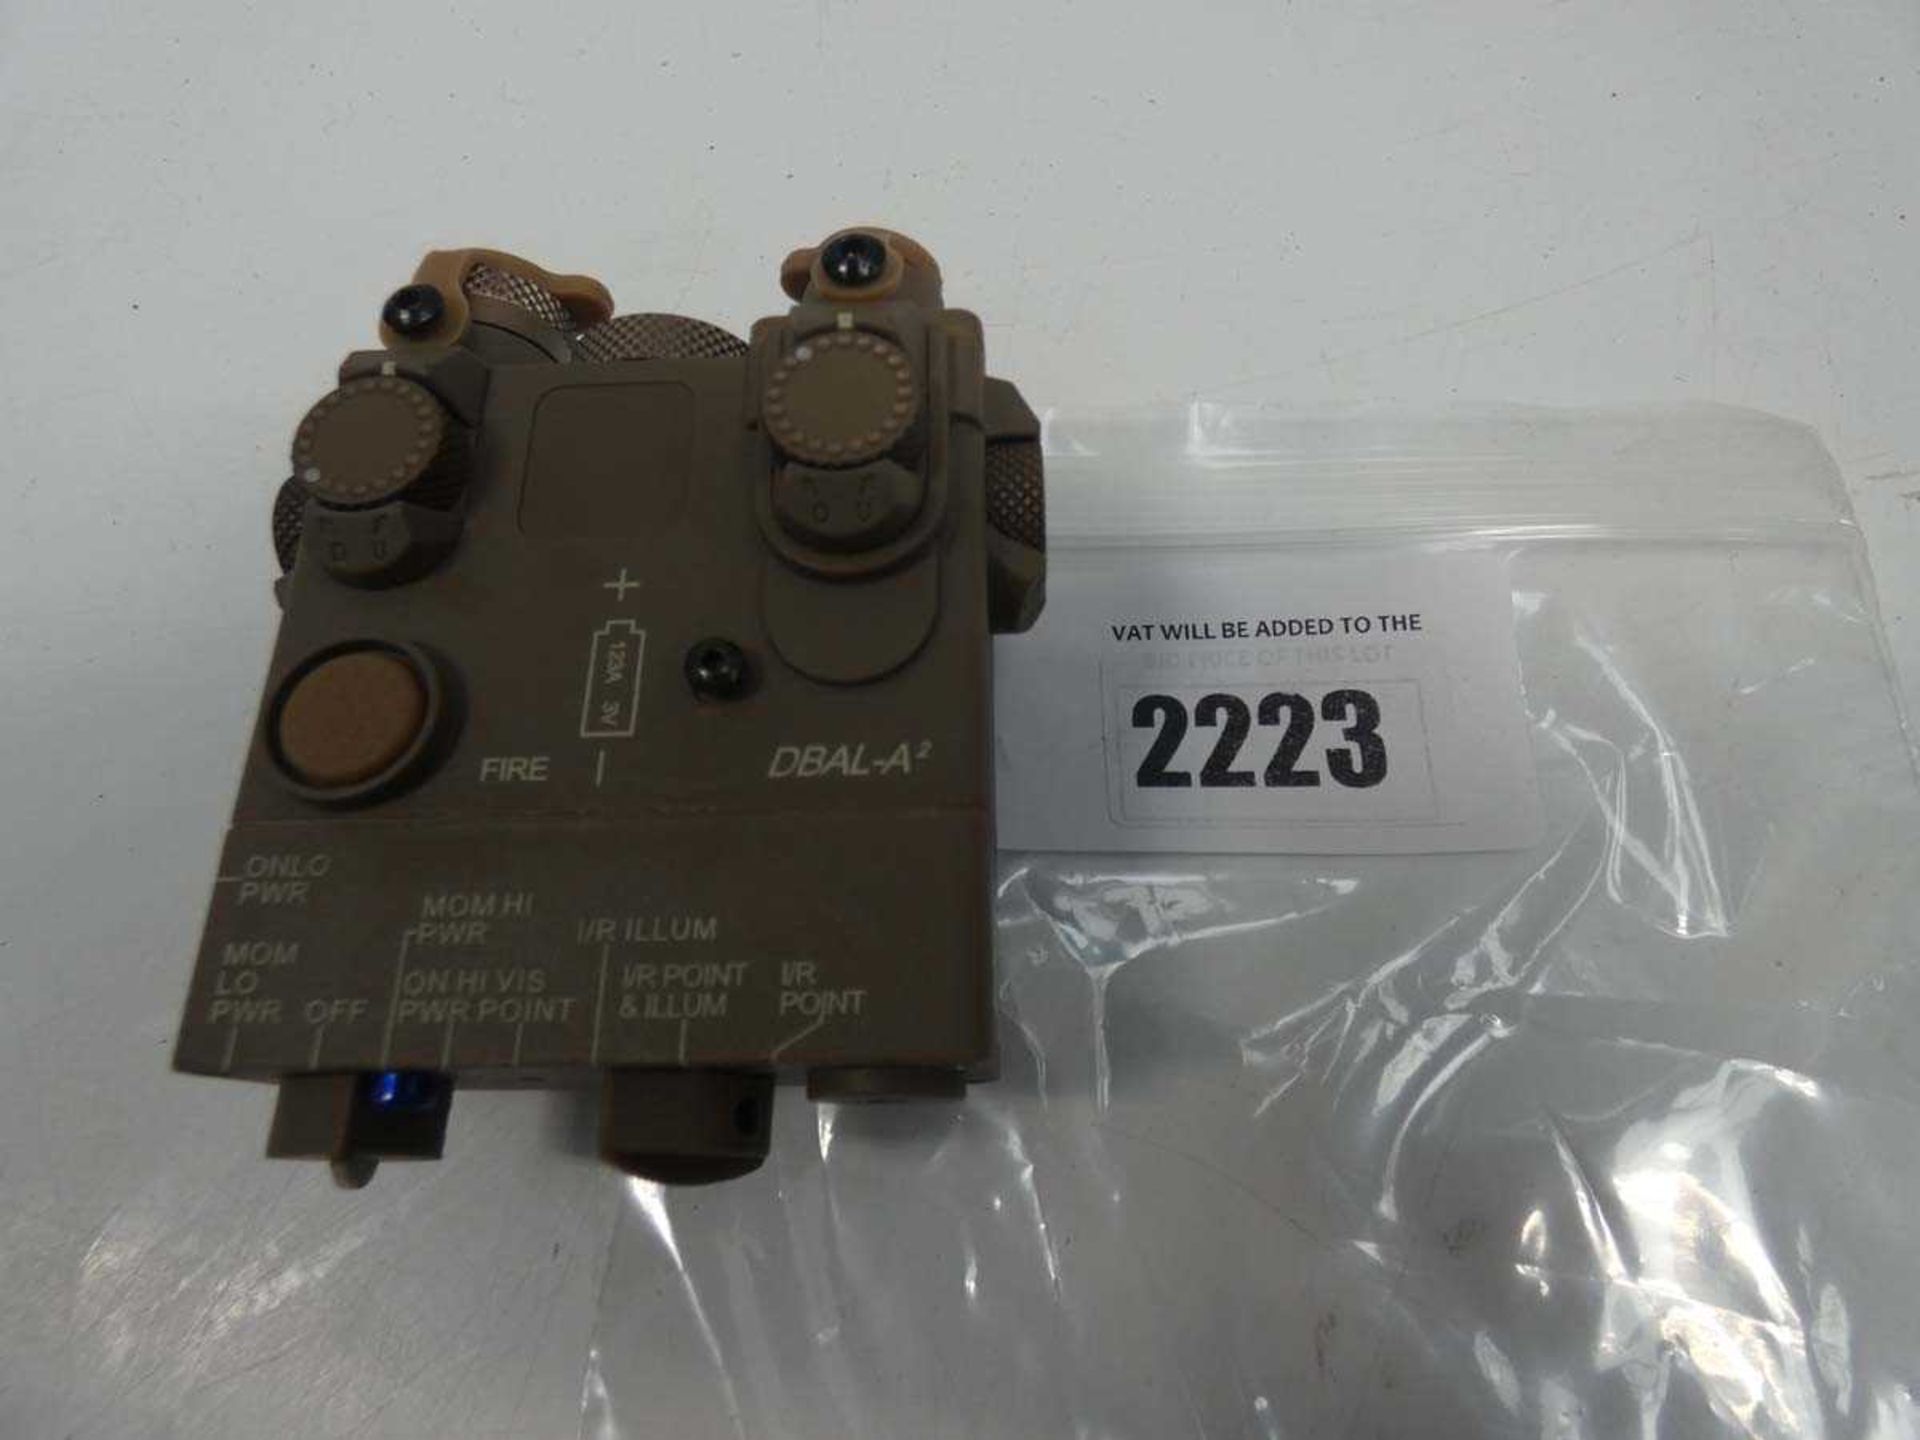 +VAT DBAL-A2 aiming laser for airsoft